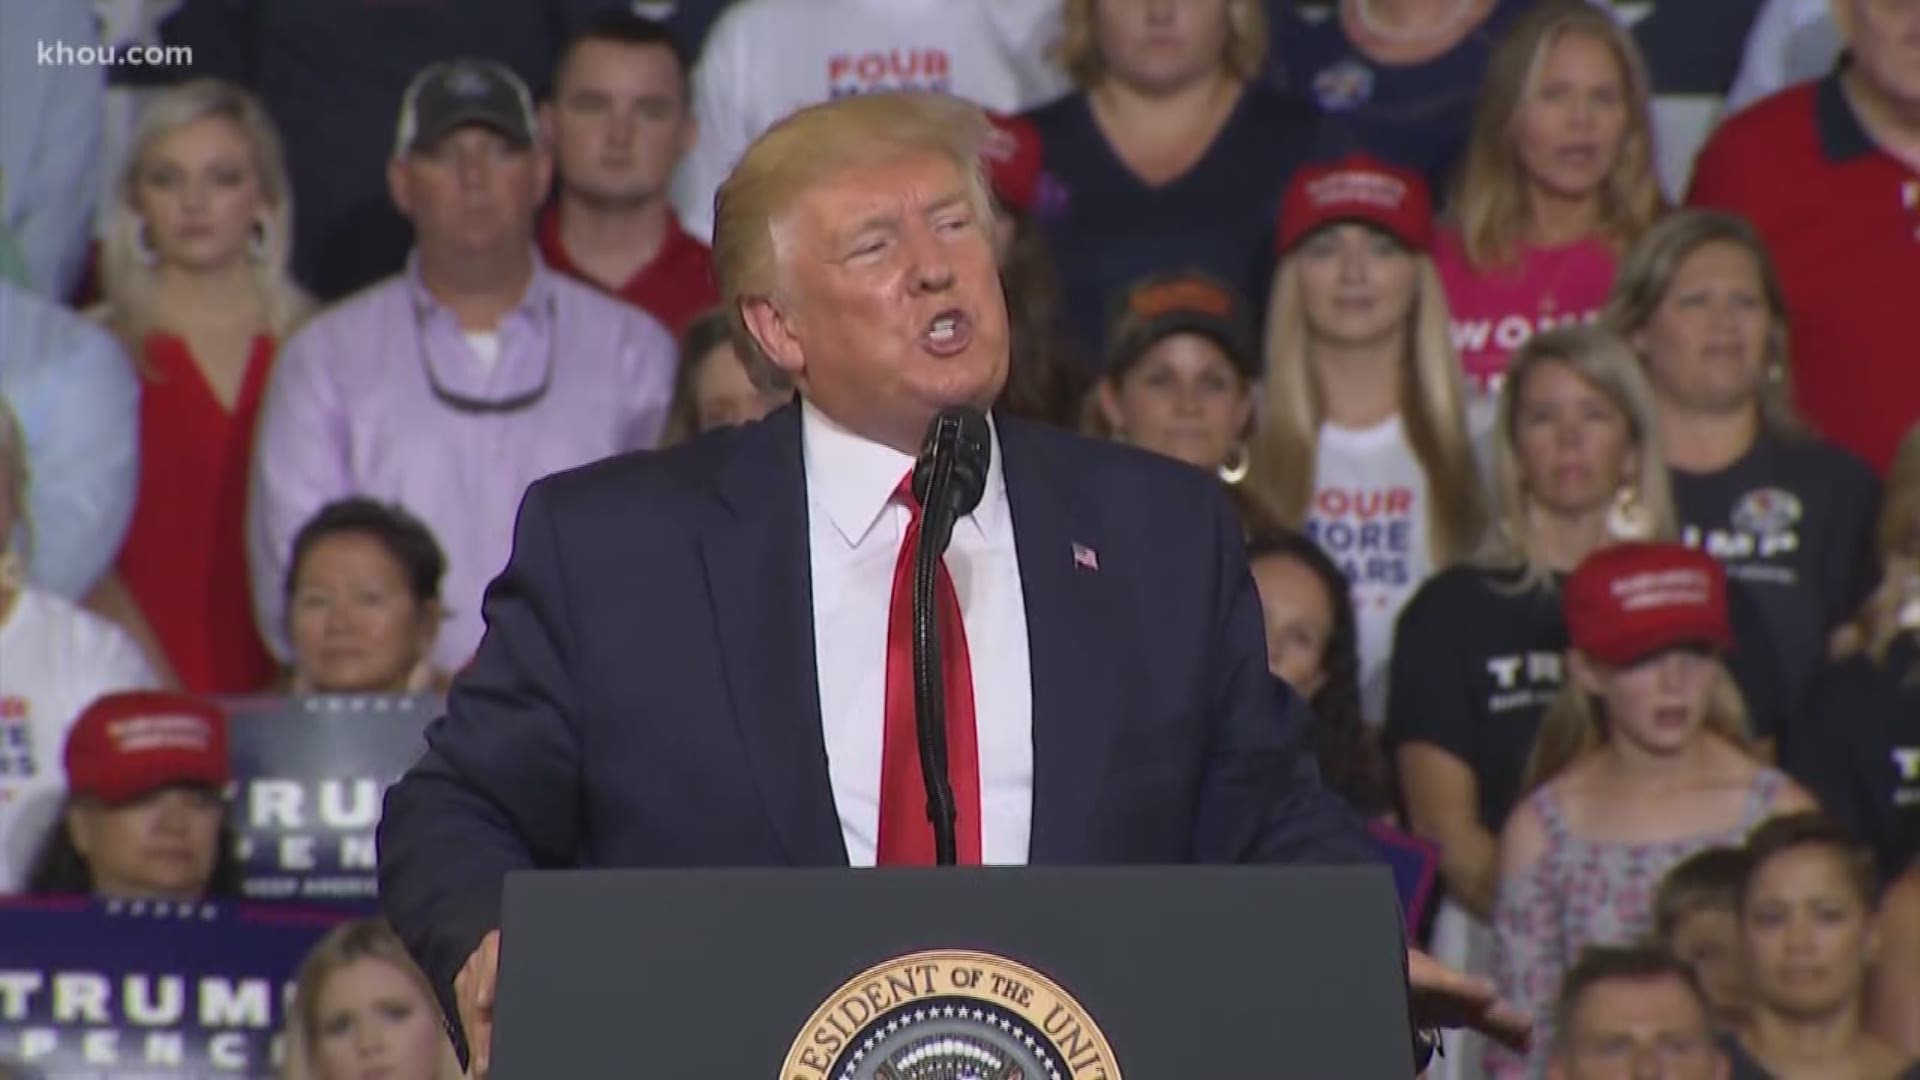 A combative President Donald Trump rallied Republican supporters Wednesday in North Carolina, harshly criticizing four fiery, left-wing congresswomen of being un-American and claiming they are the face of the Democratic Party that will ruin the country.